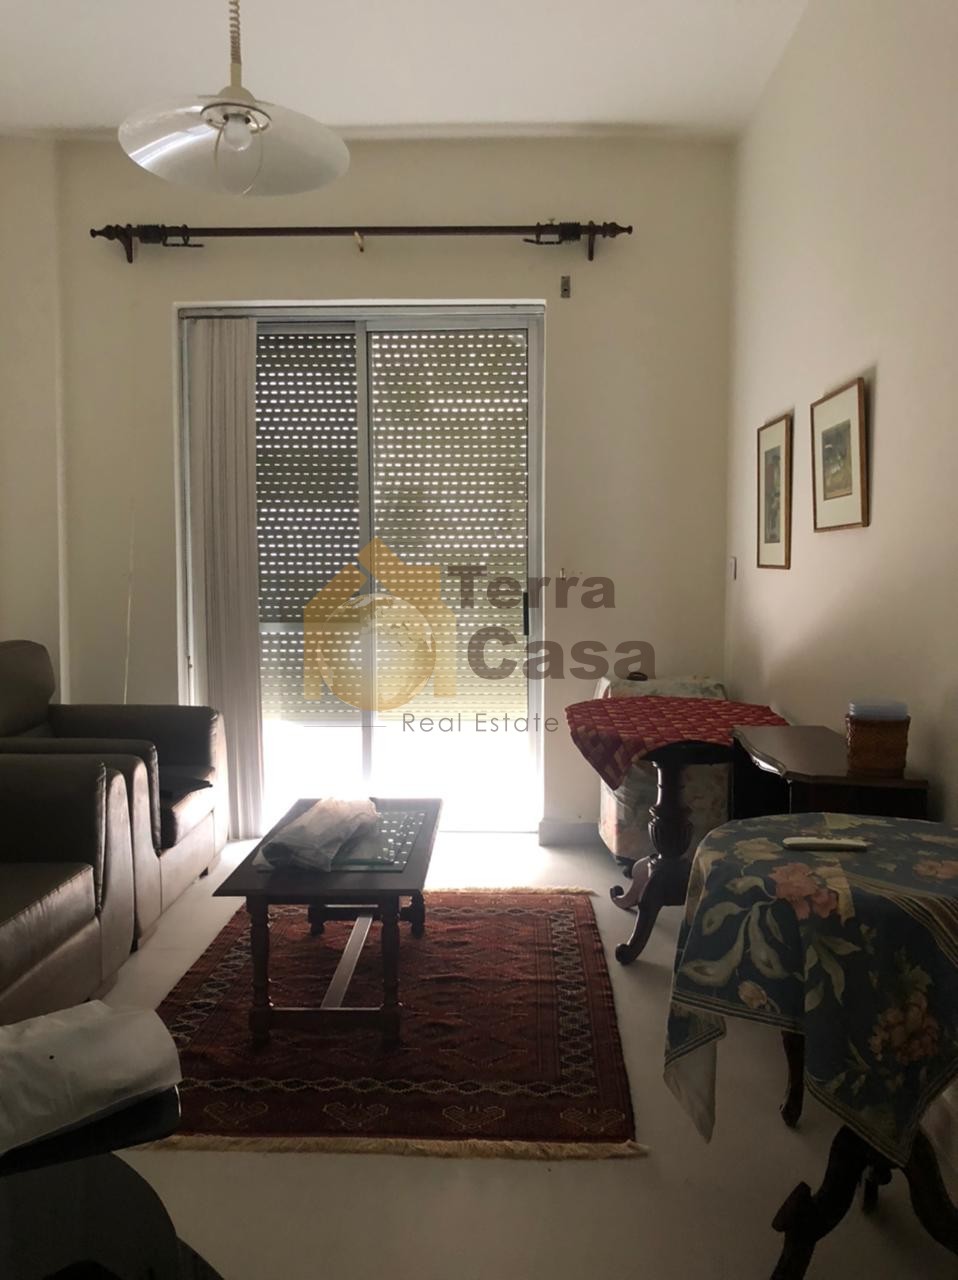 Fully furnished apartment cash payment. Ref# 2622